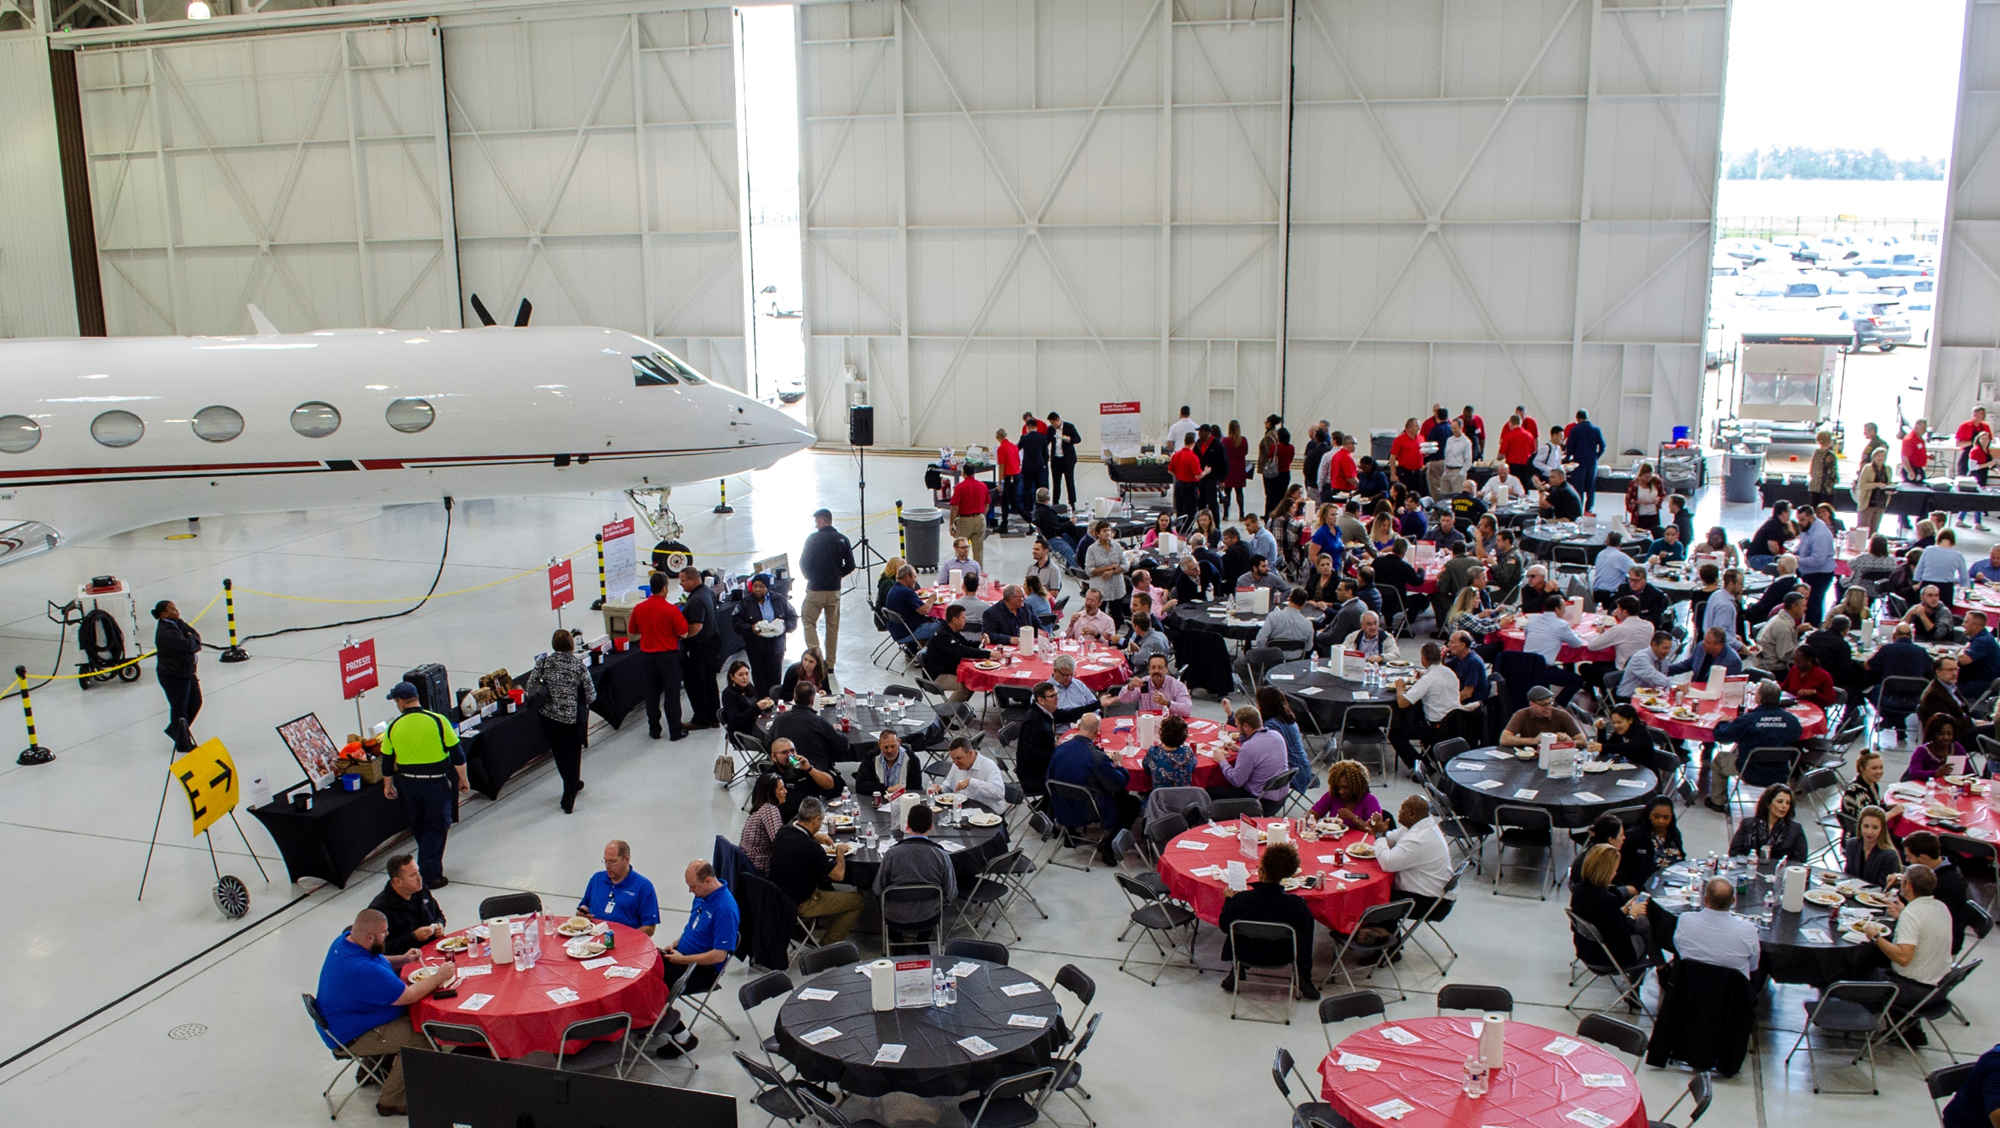 overhead view of hangar filled with round tables and people gathered